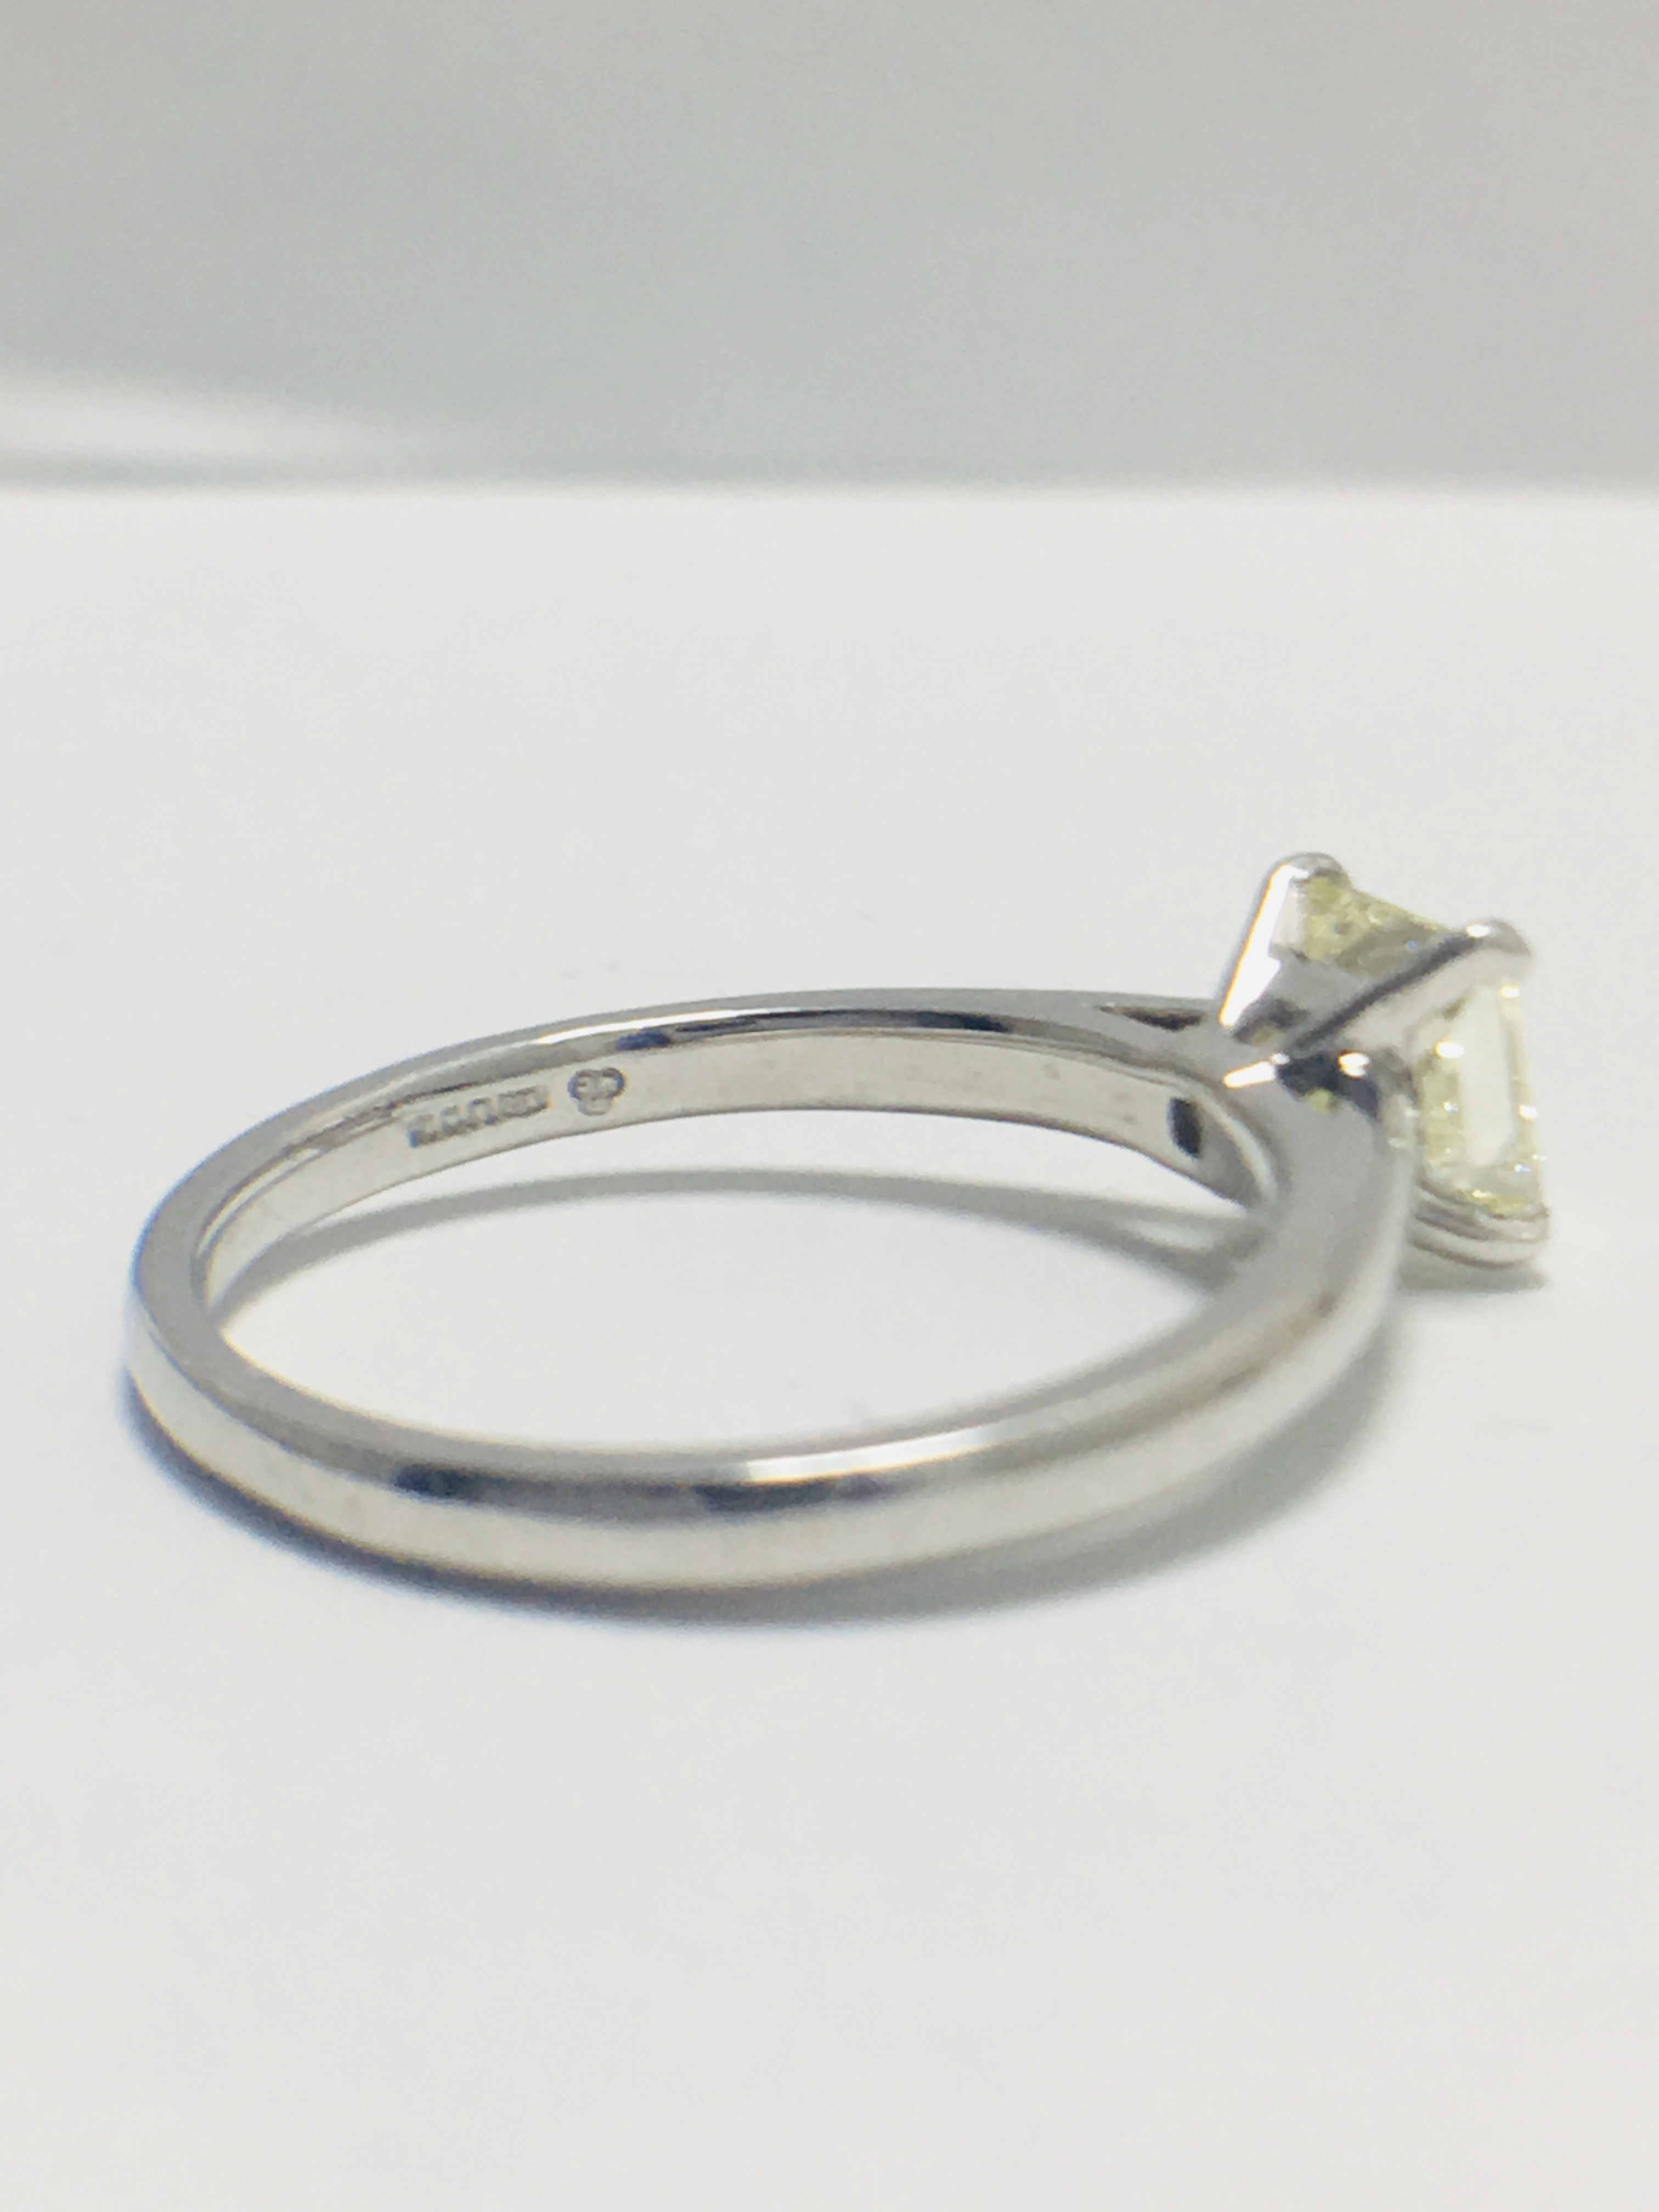 1ct princess cut solitaire ring - Image 4 of 6